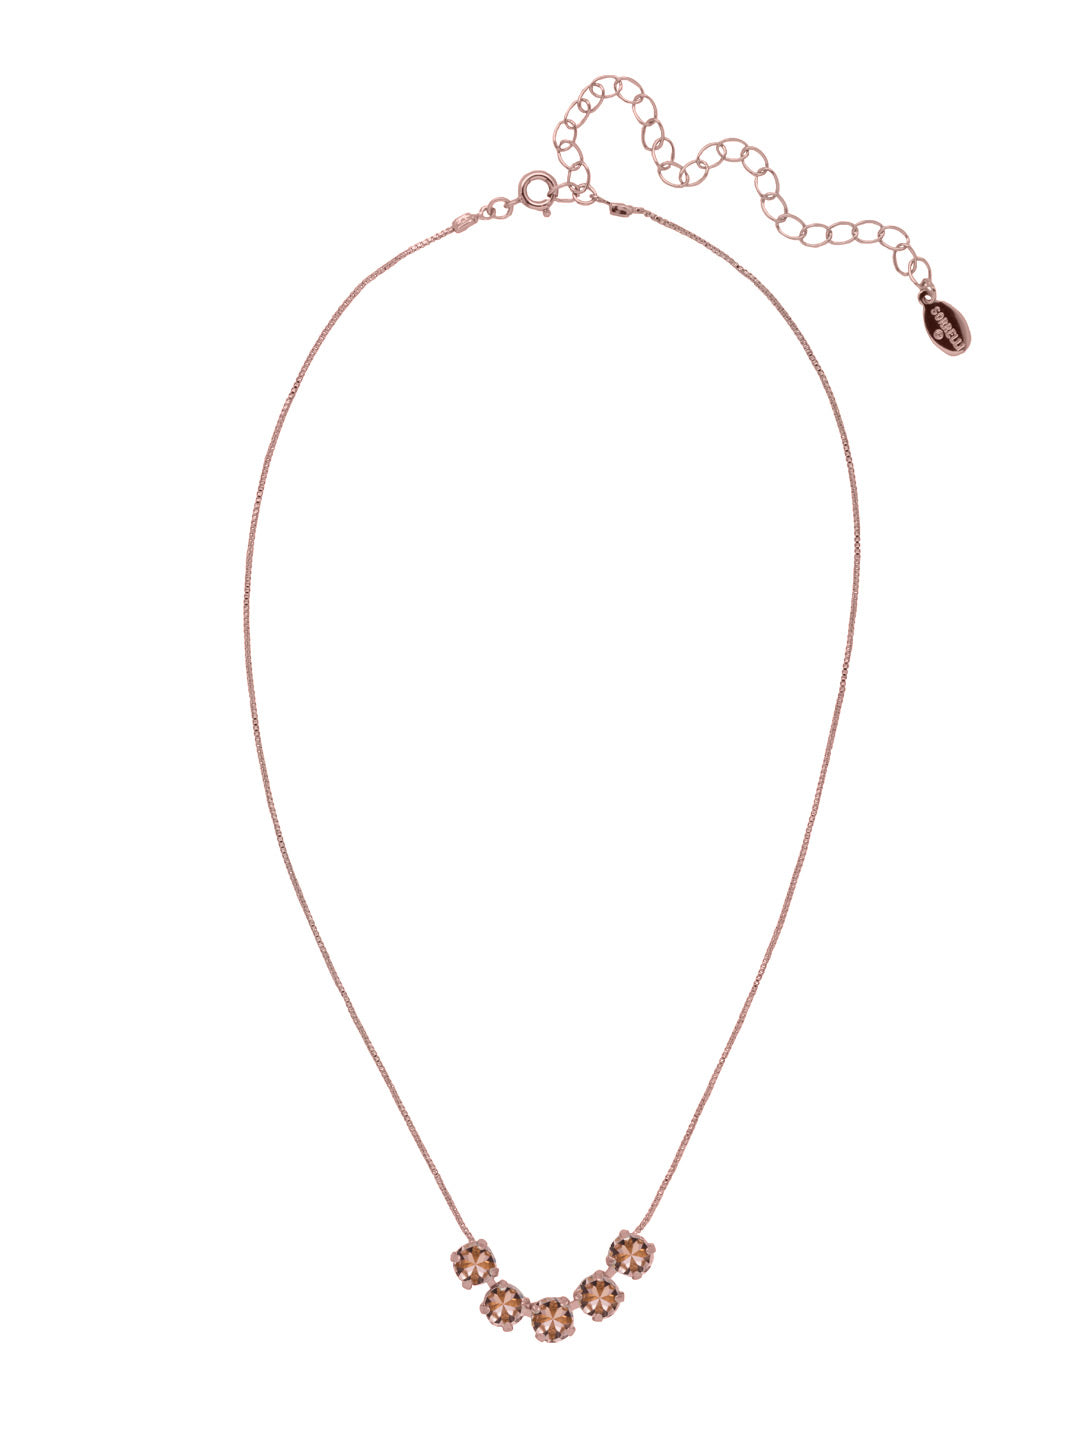 Shaughna Tennis Necklace - NFC84RGVIN - <p>The Shaughna Tennis Necklace features five crystals on a delicate adjustable chain. From Sorrelli's Vintage Rose collection in our Rose Gold-tone finish.</p>